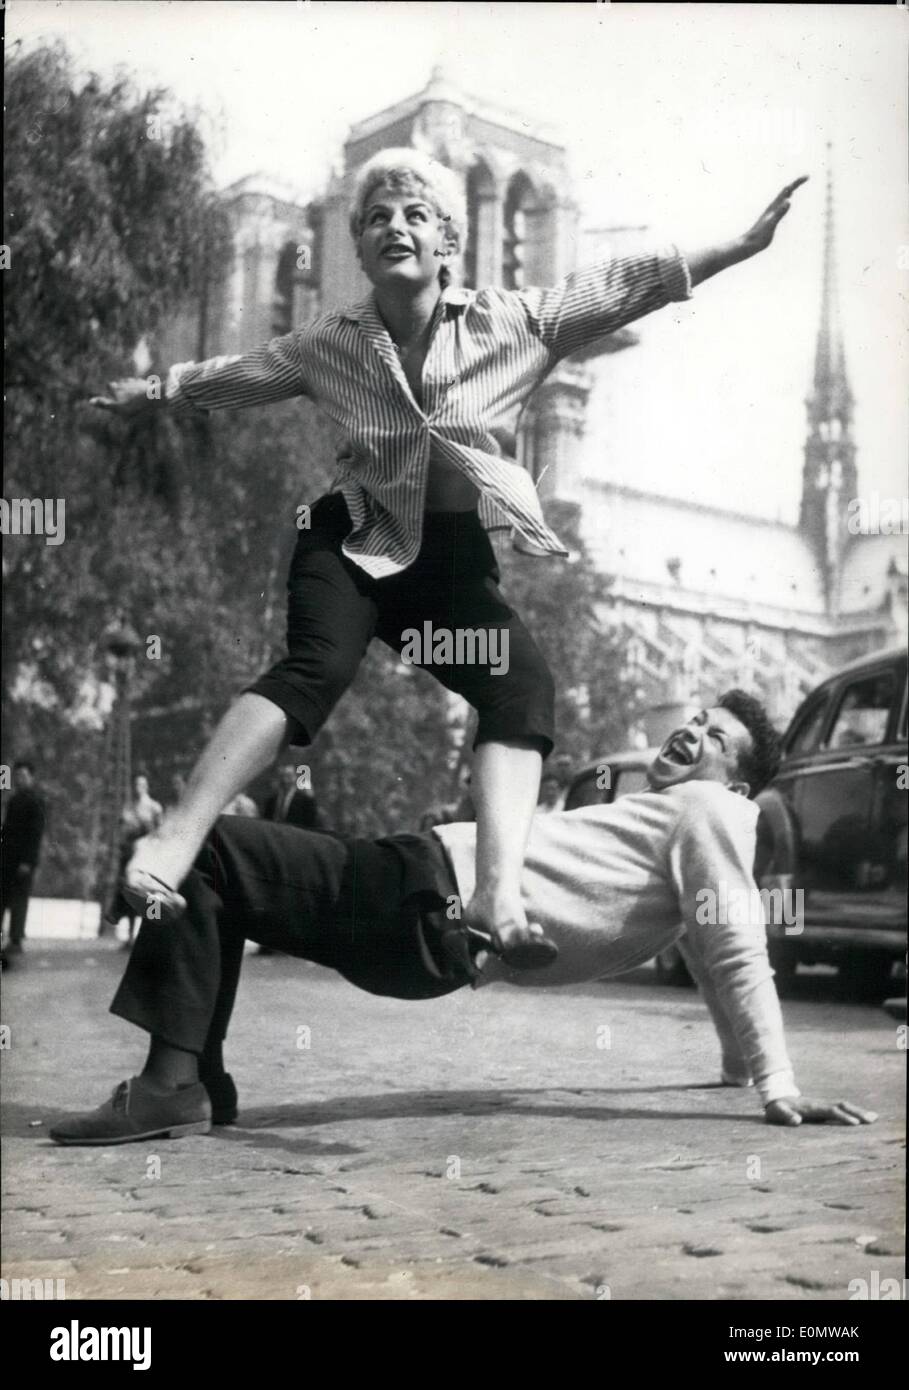 Sep. 09, 1956 - Rock 'N' Roll Crosses Channel: The rock and roll frenzy after sweeping London is now threatening to spread to Paris. Henri Salvador, the crooner, and Mimi Grilli, a cabaret dancer, give a convincing demonstration of rock'n'roll in Paris today. Stock Photo